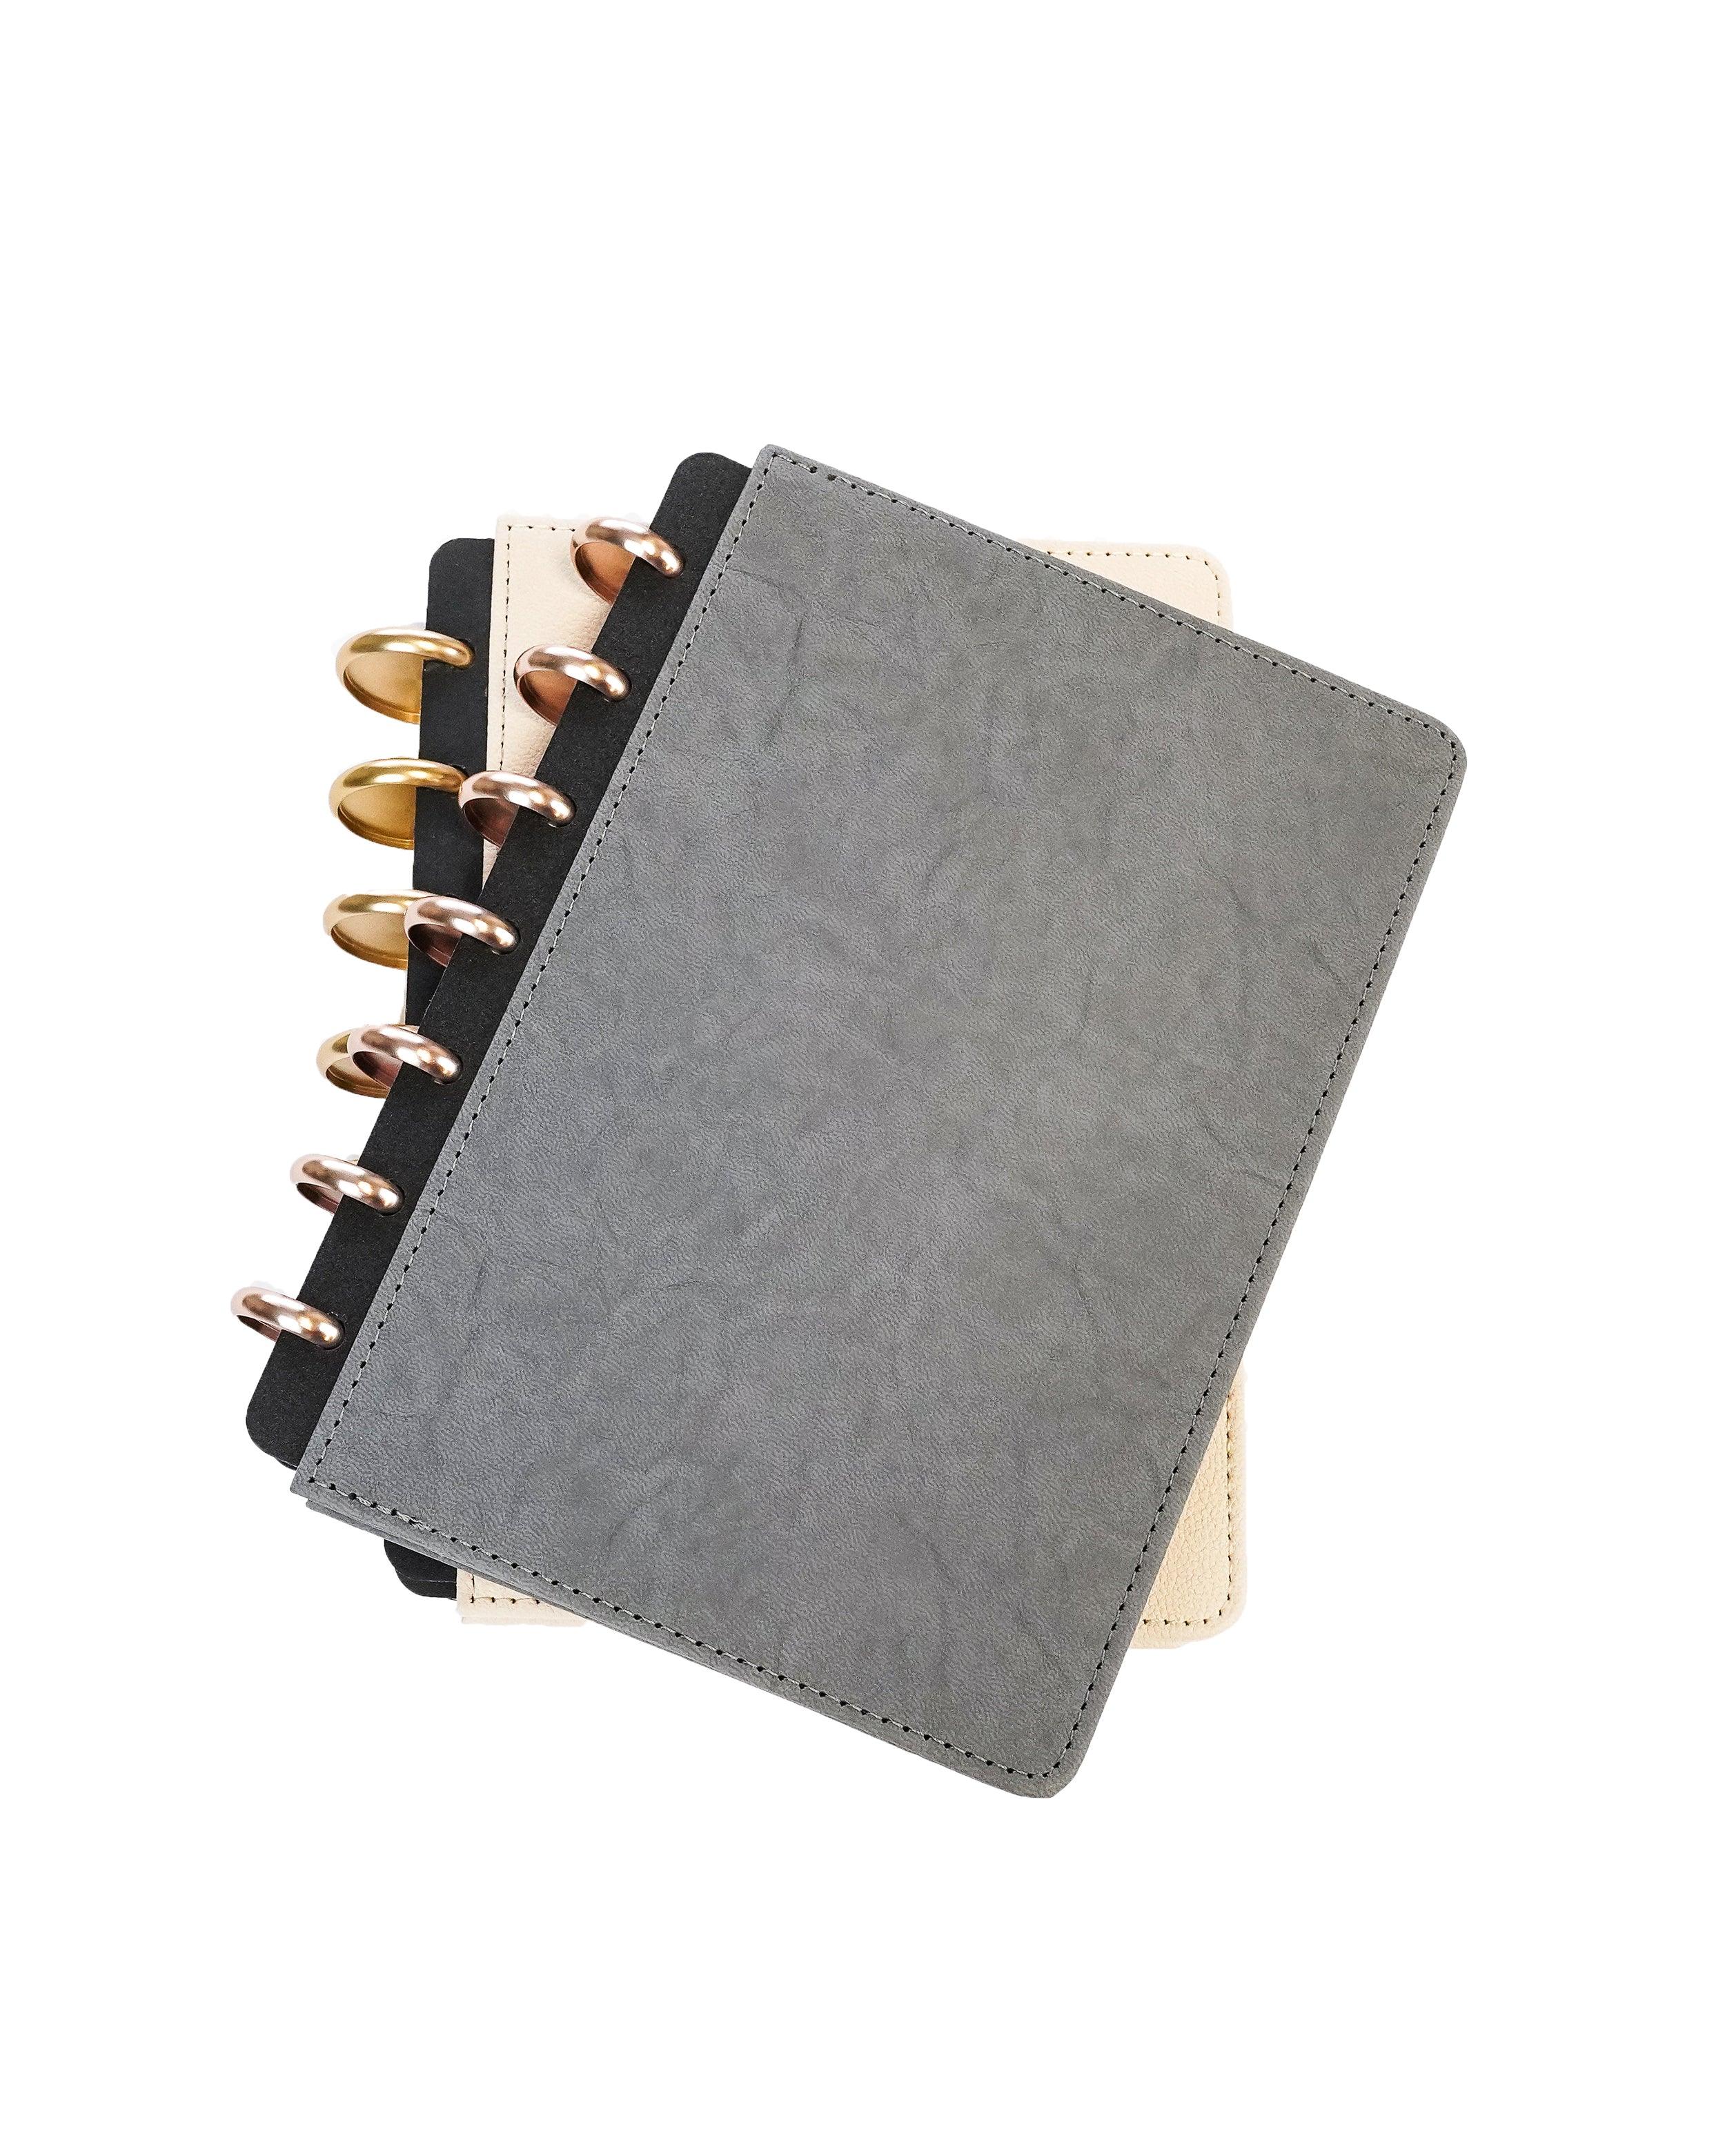 Vegan leather planner cover for discbound planner systems and discbound notebook systems by Janes Agenda.